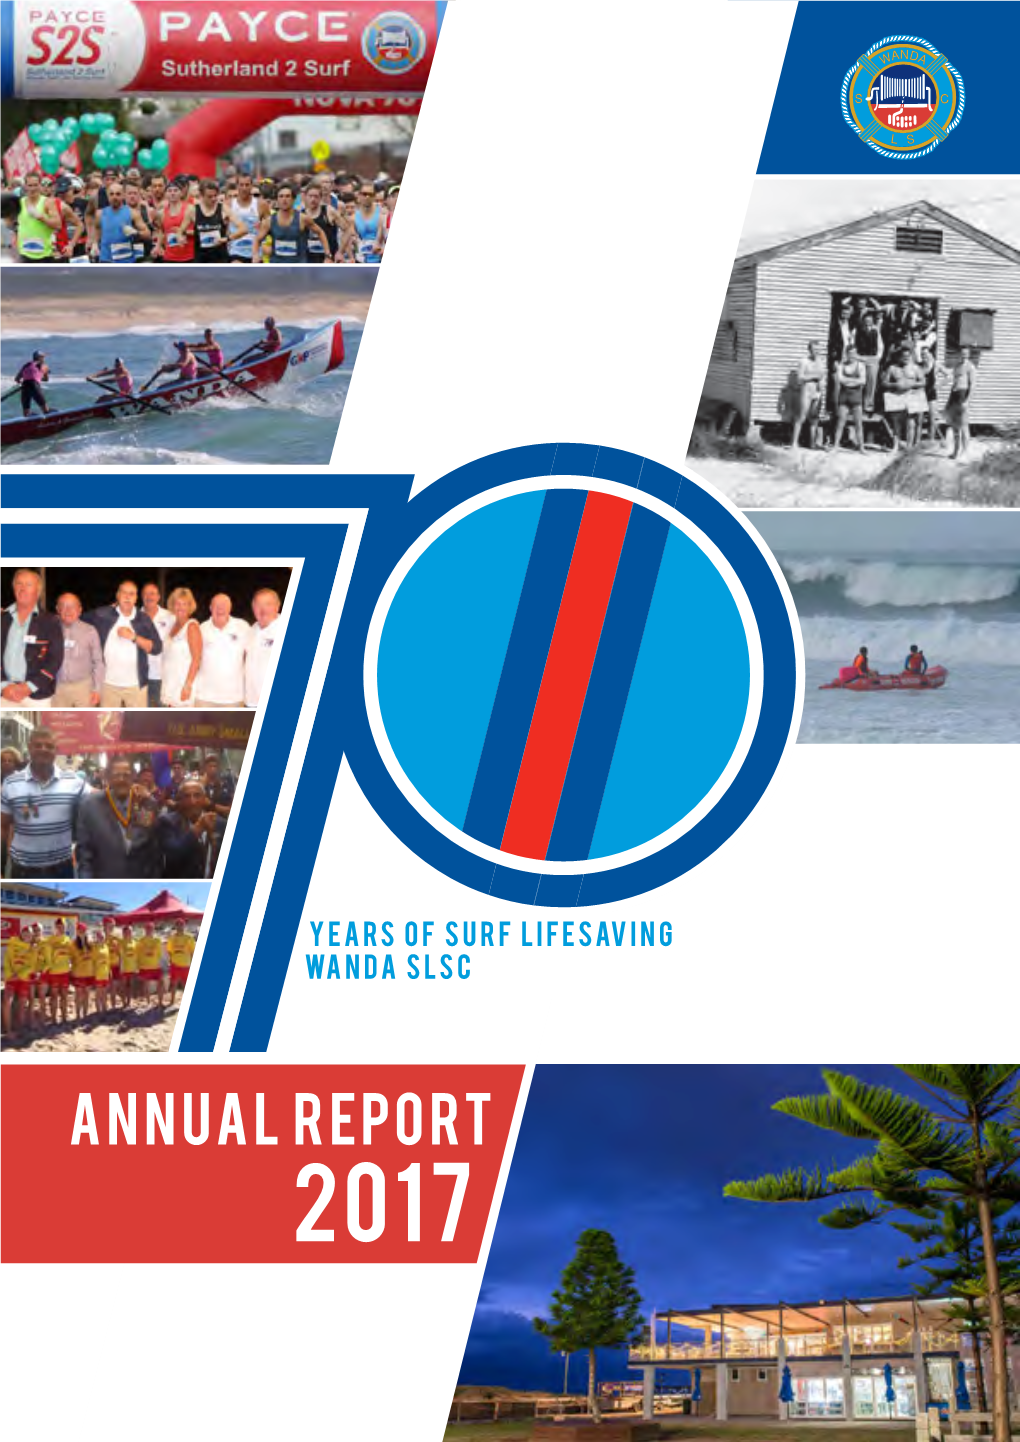 Annual Report 2017 Australian Gold Medallists Contents